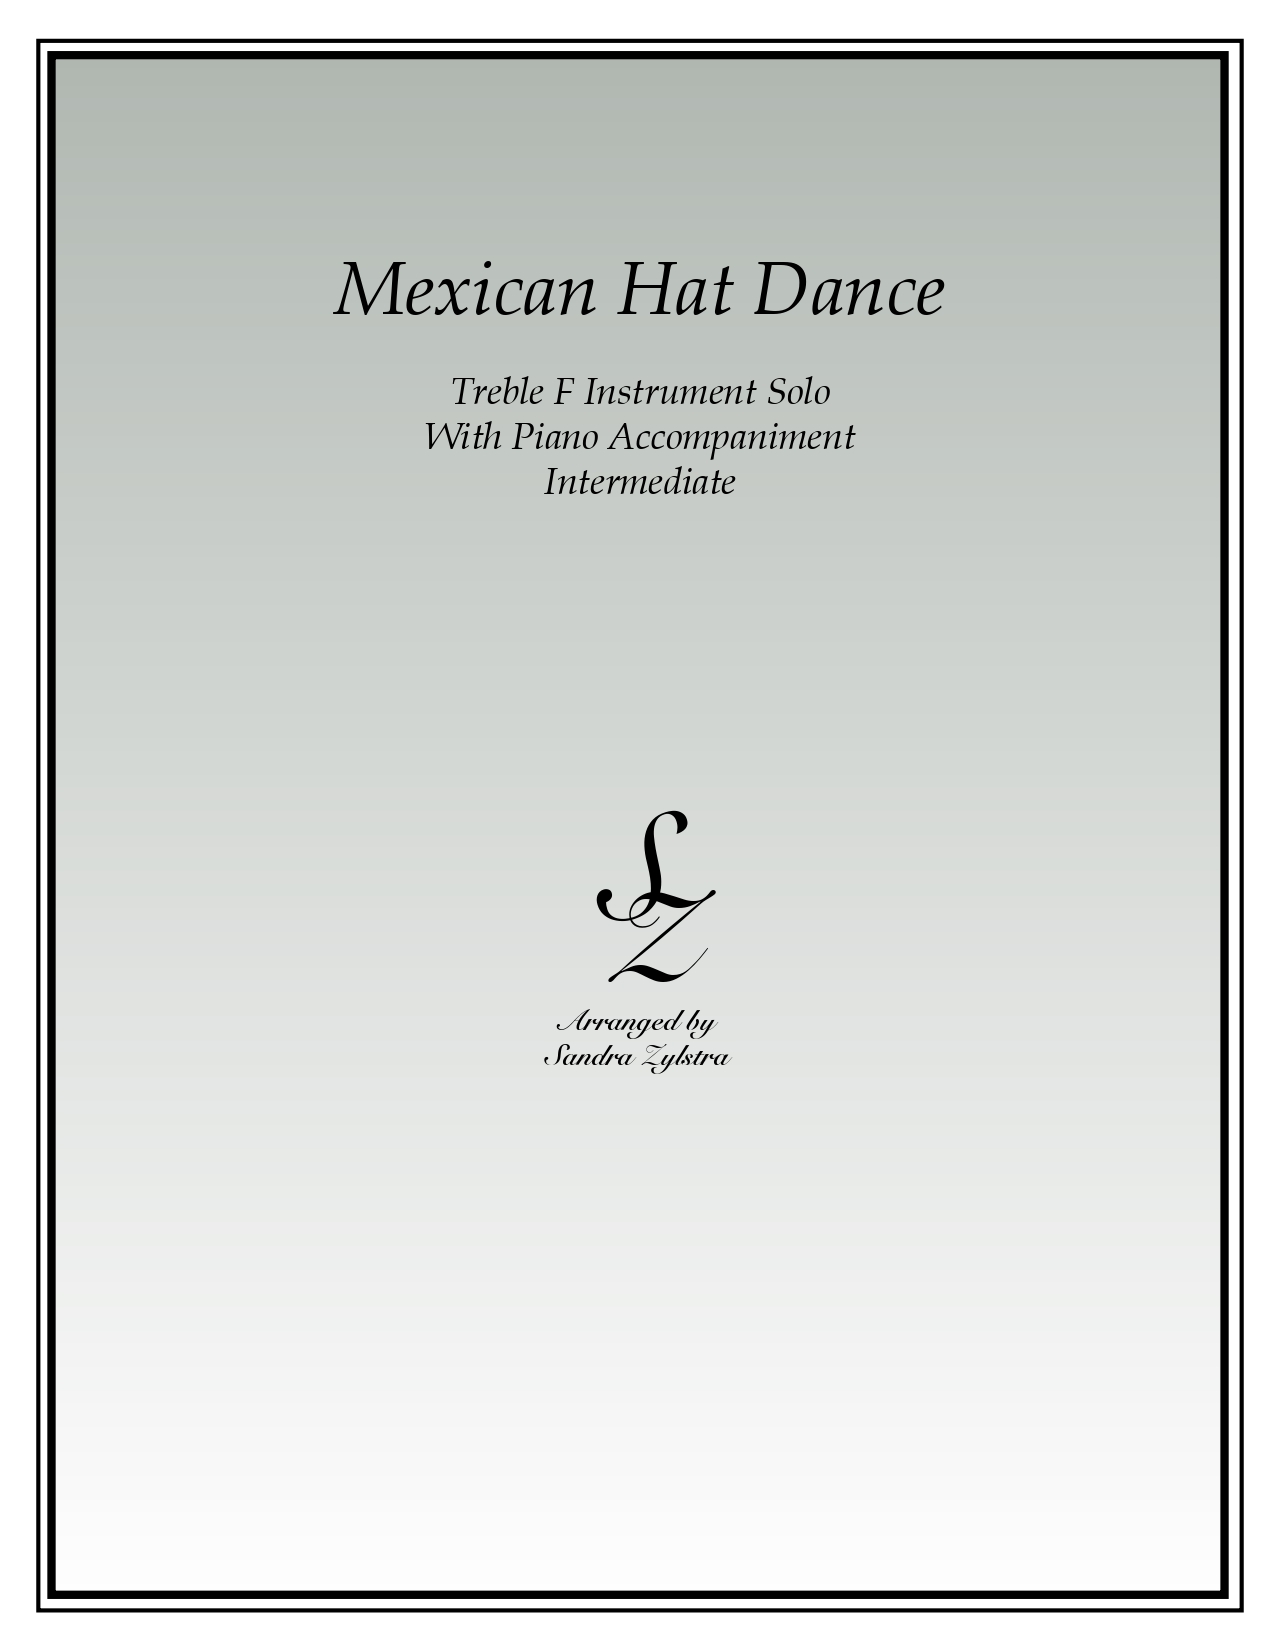 Mexican Hat Dance F instrument solo part cover page 00011